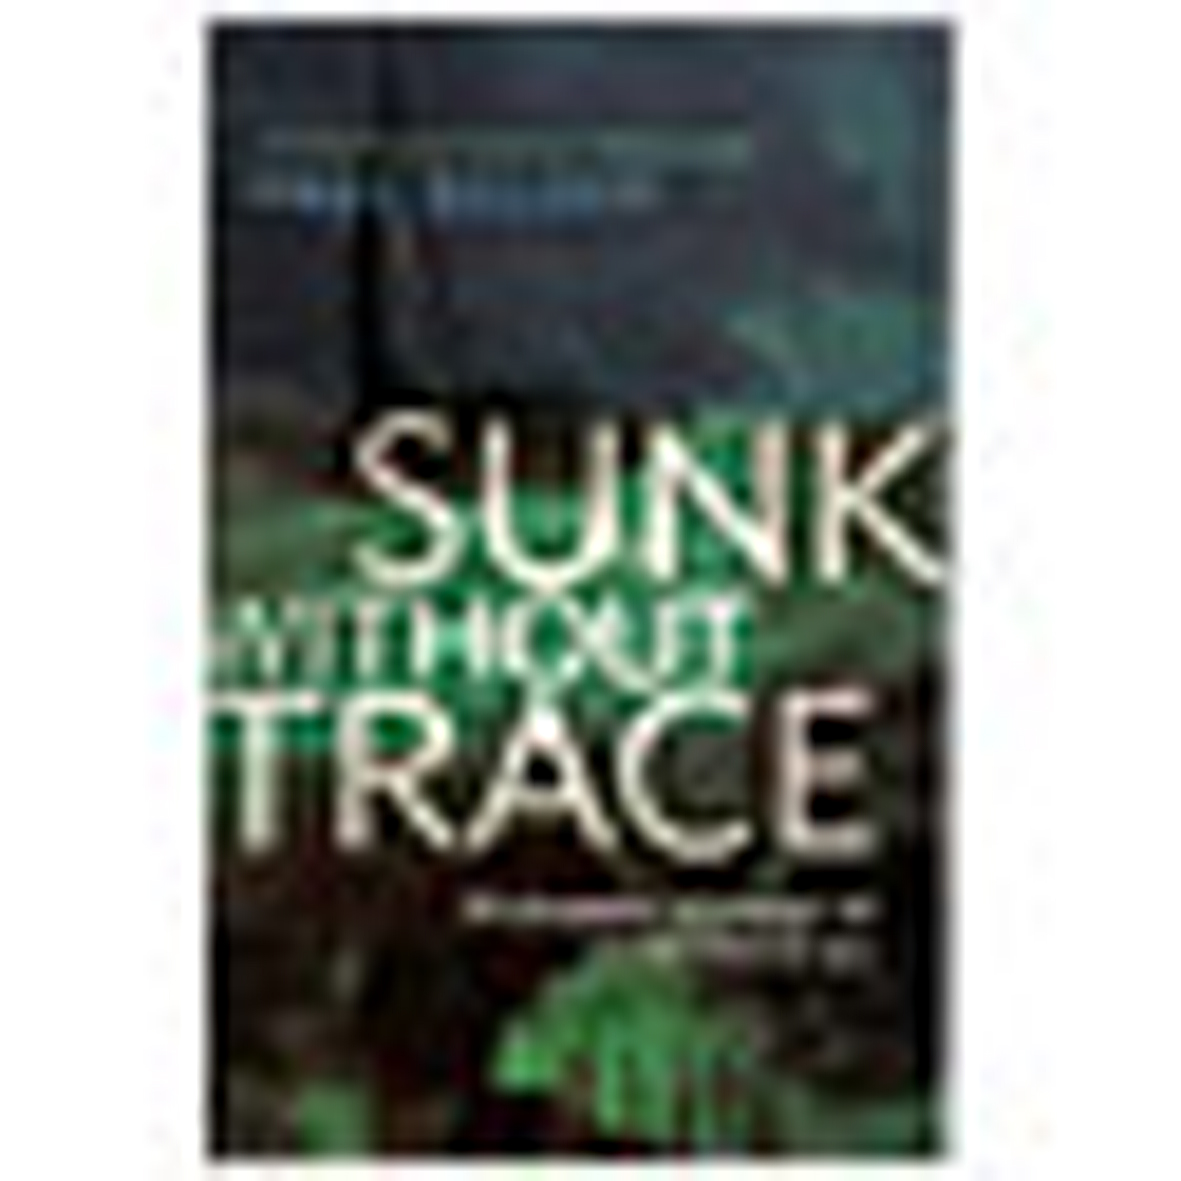 Sunk without Trace